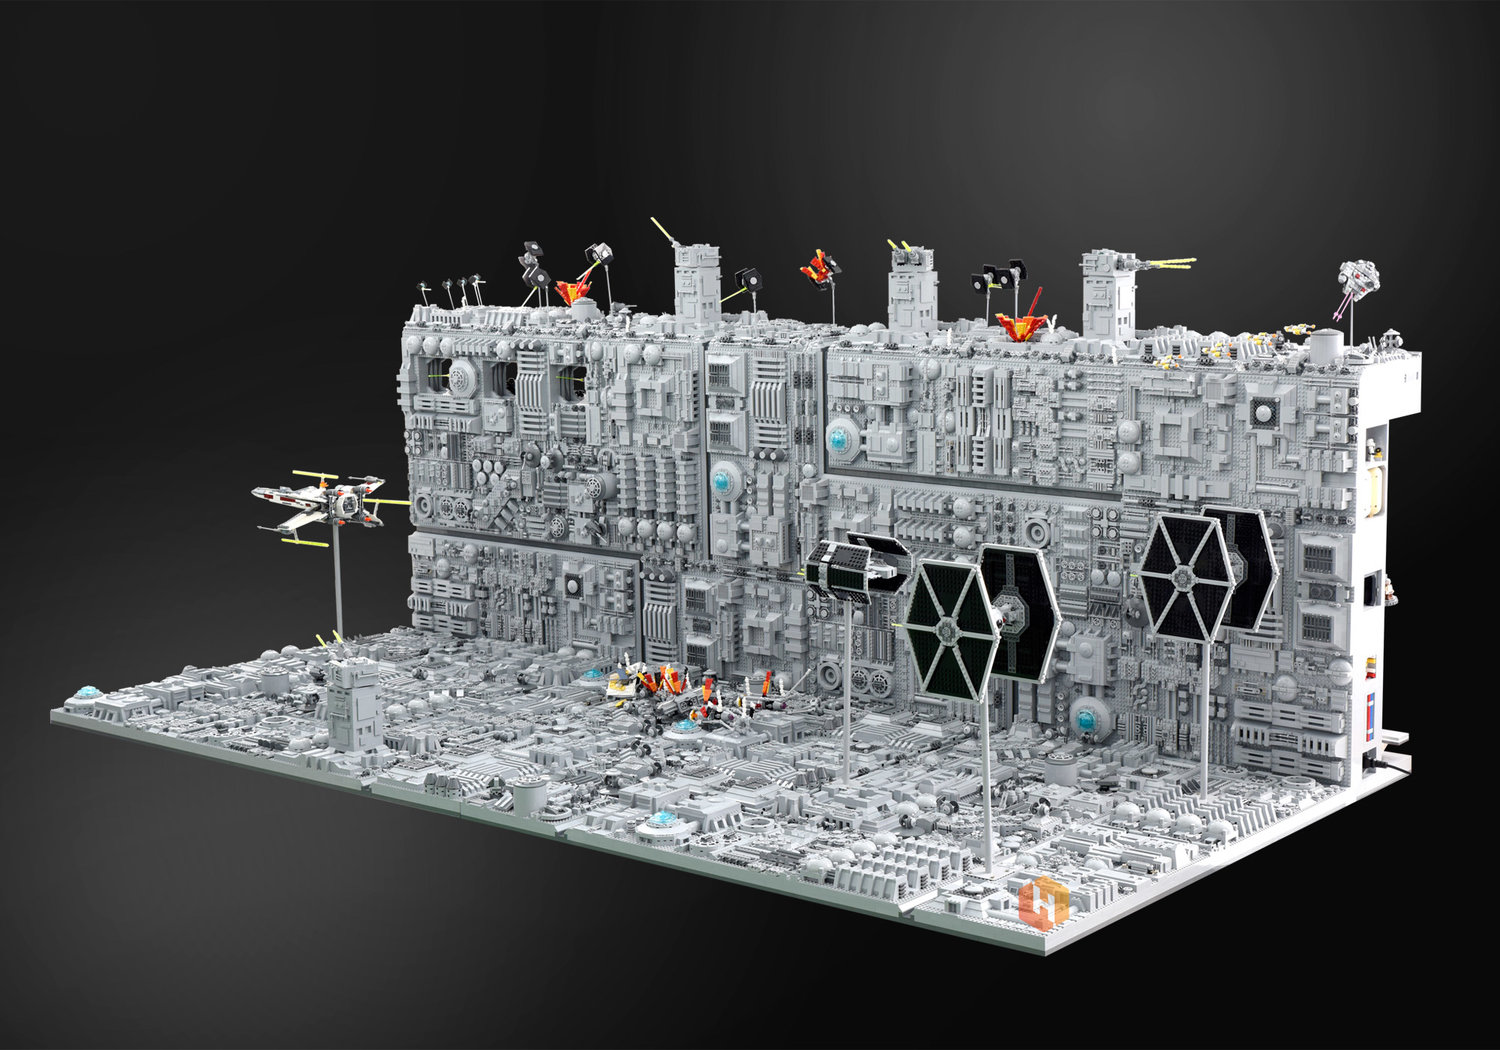 Super Detailed And Huge Lego Diorama Of The Star Wars Death